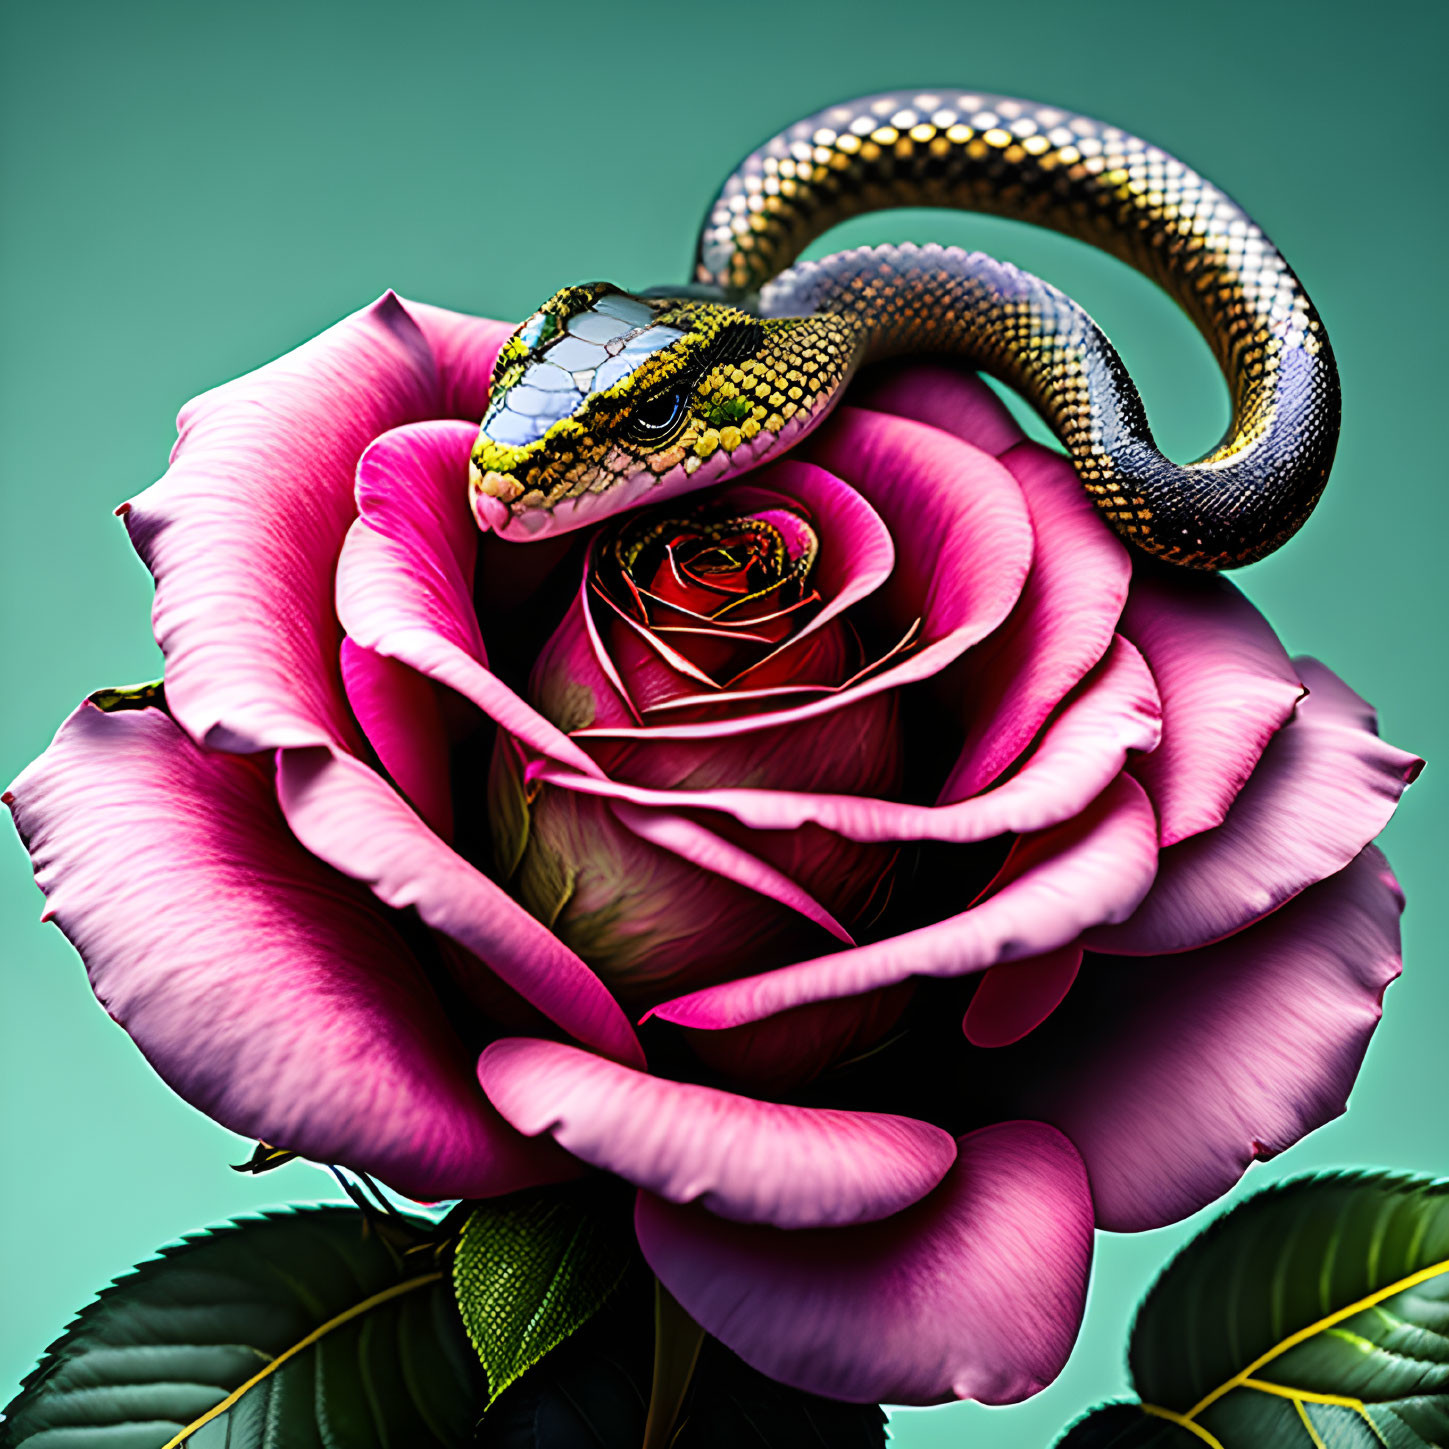 Snake intertwines with pink rose on teal backdrop